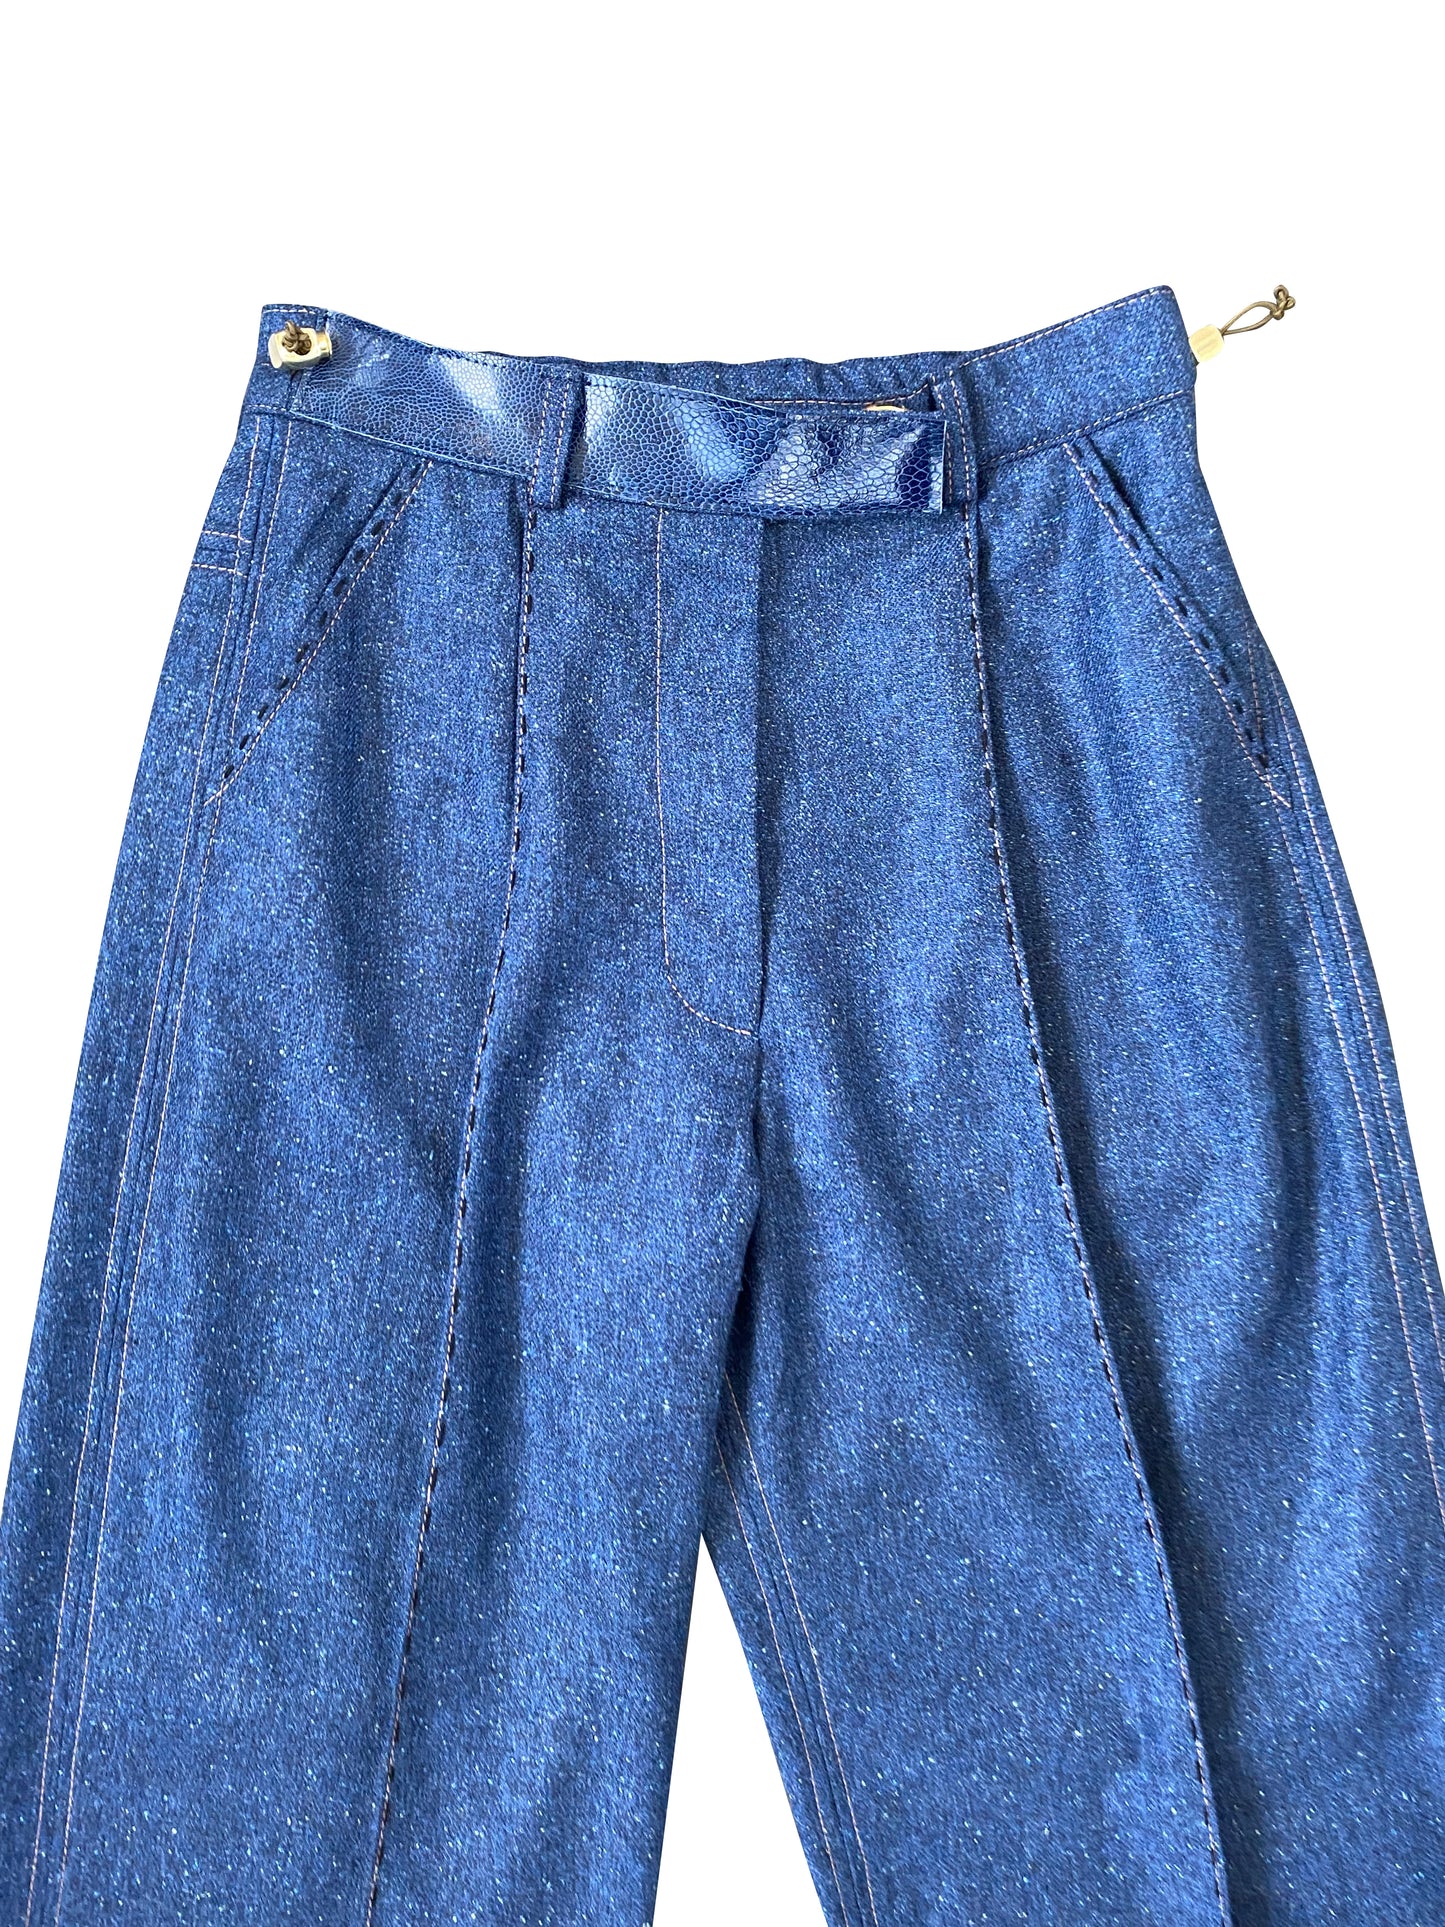 Speckled Wool Tailored Pants with Ostrich Leather Shin Details